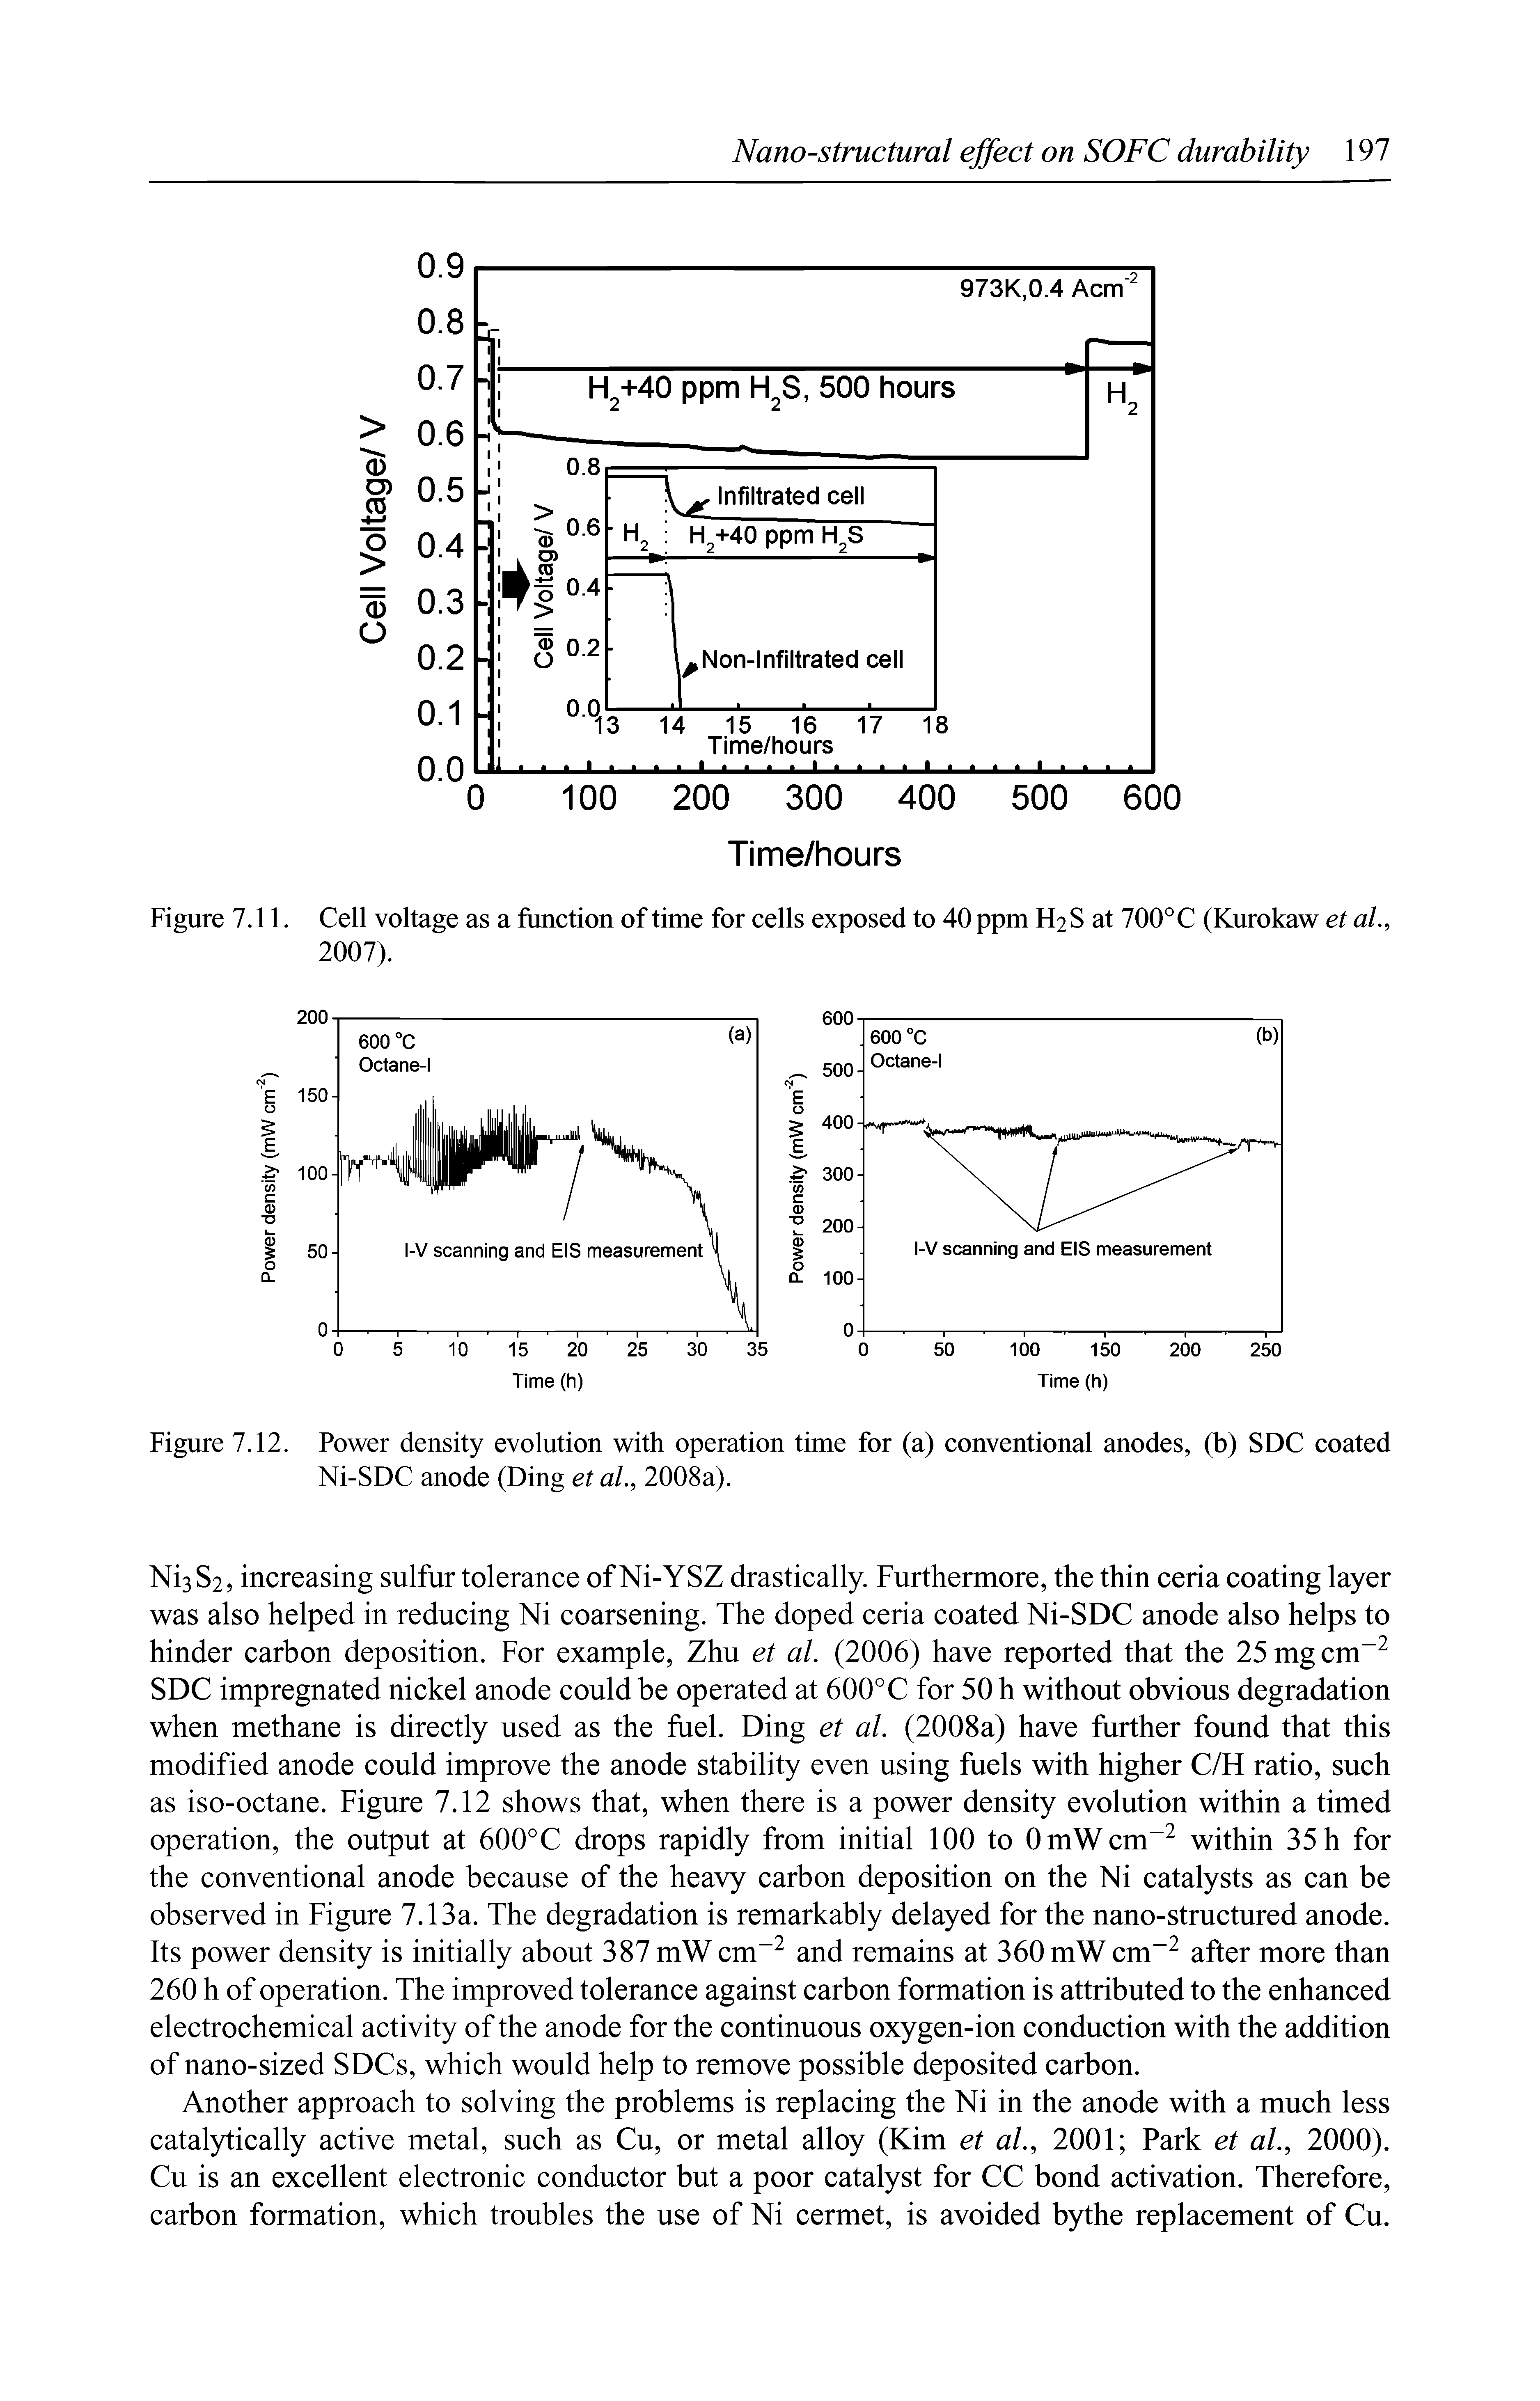 Figure 7.12. Power density evolution with operation time for (a) conventional anodes, (b) SDC coated Ni-SDC anode (Ding et ah, 2008a).